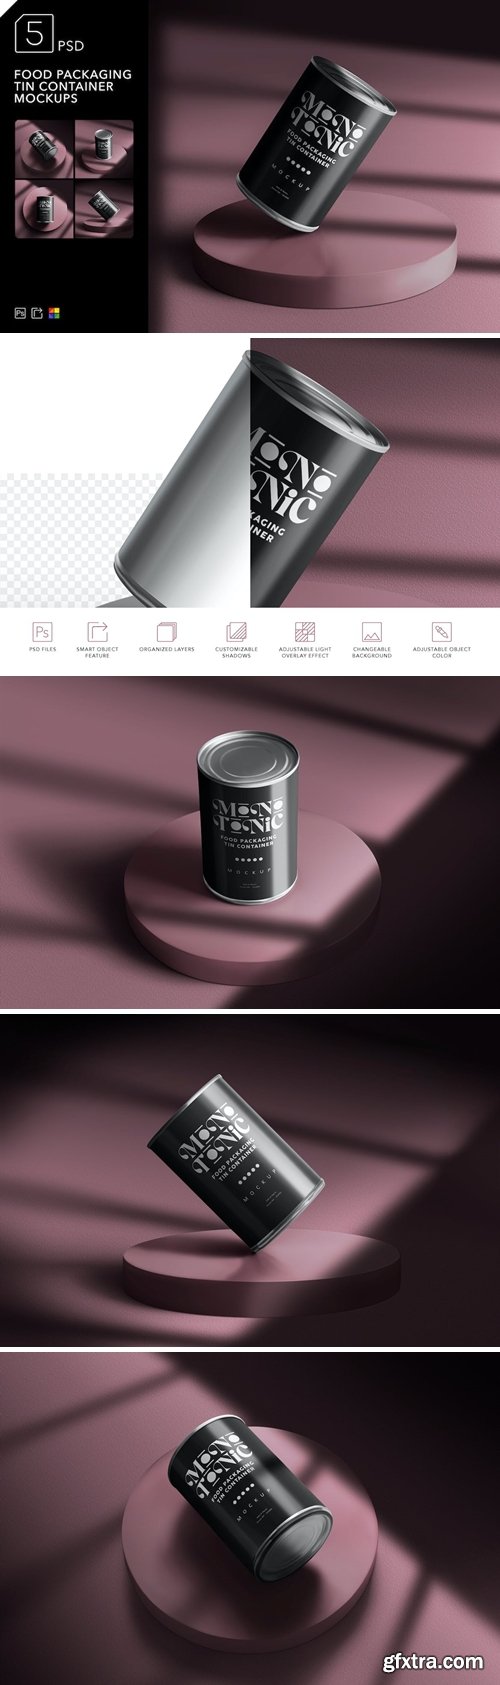 Food Packaging Tin Container Mockups L737UY4